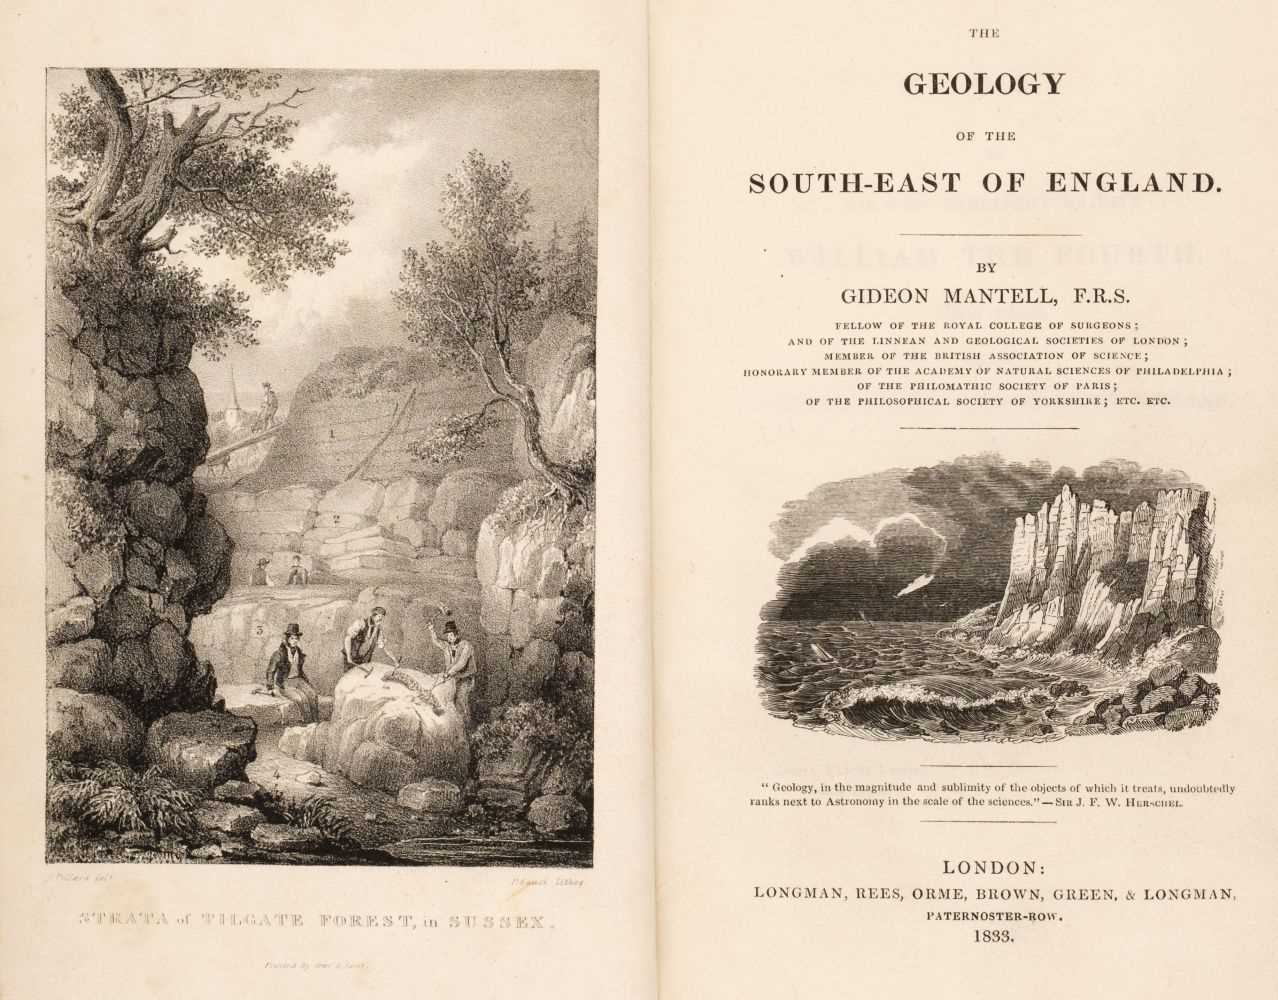 Lot 96 - Mantell (Gideon). The Geology of the South-East of England, 1st ed., 1833